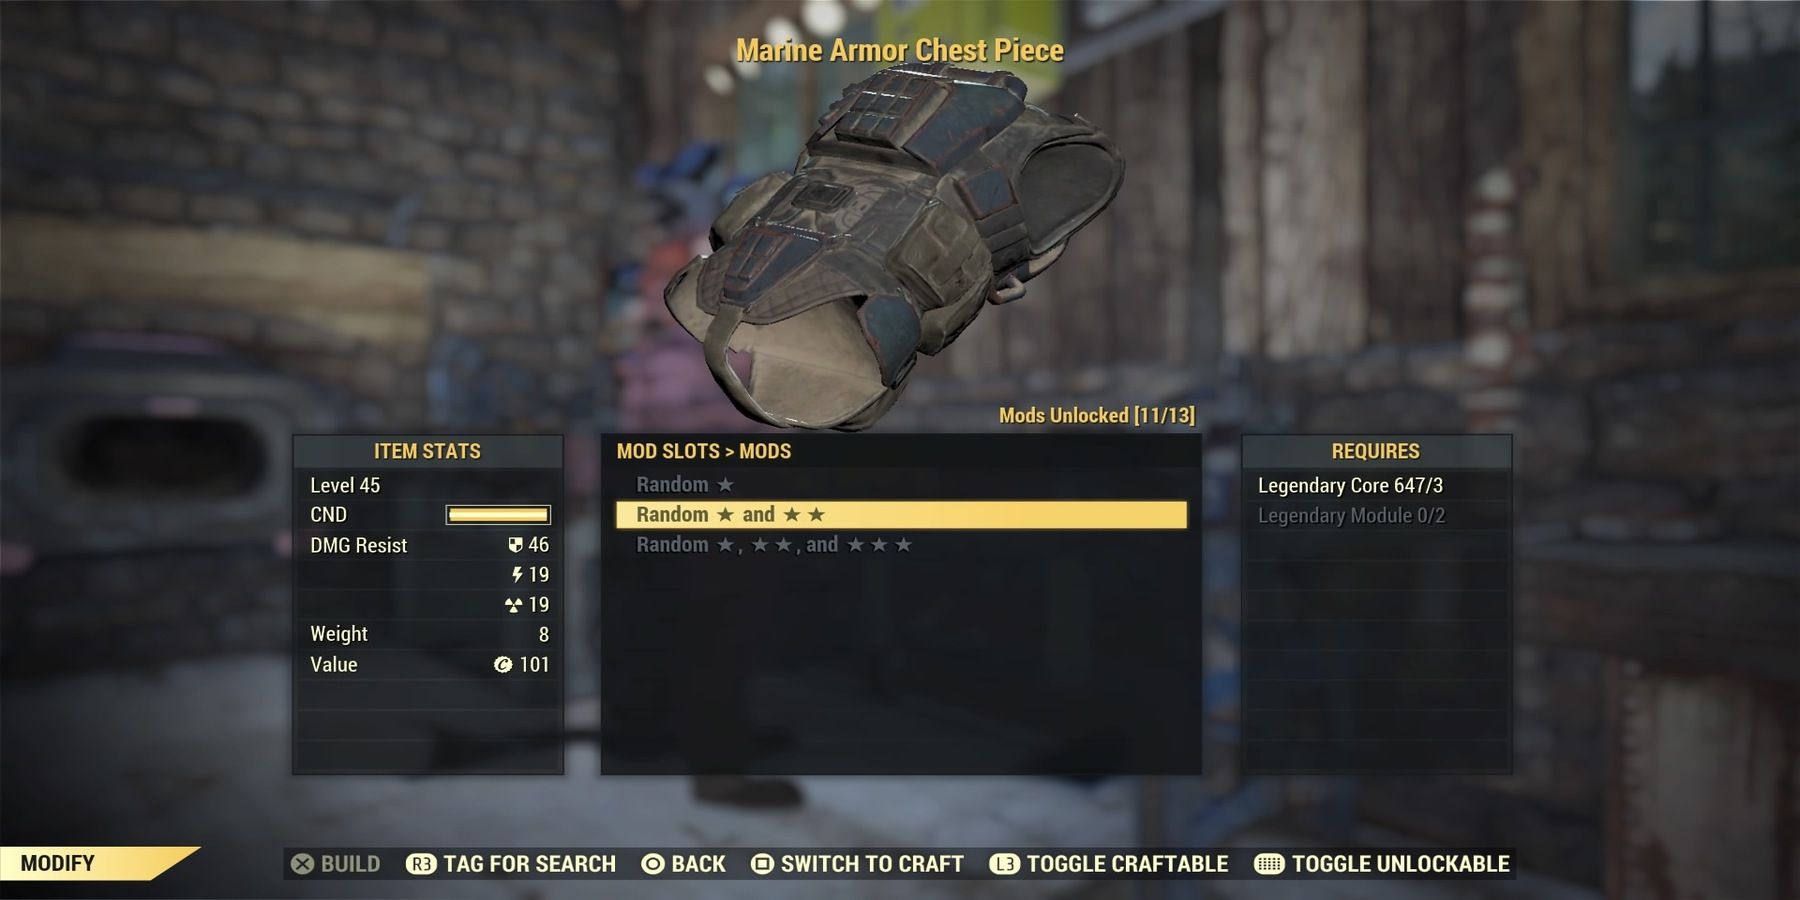 Marine Armor Chest Piece in Fallout 76